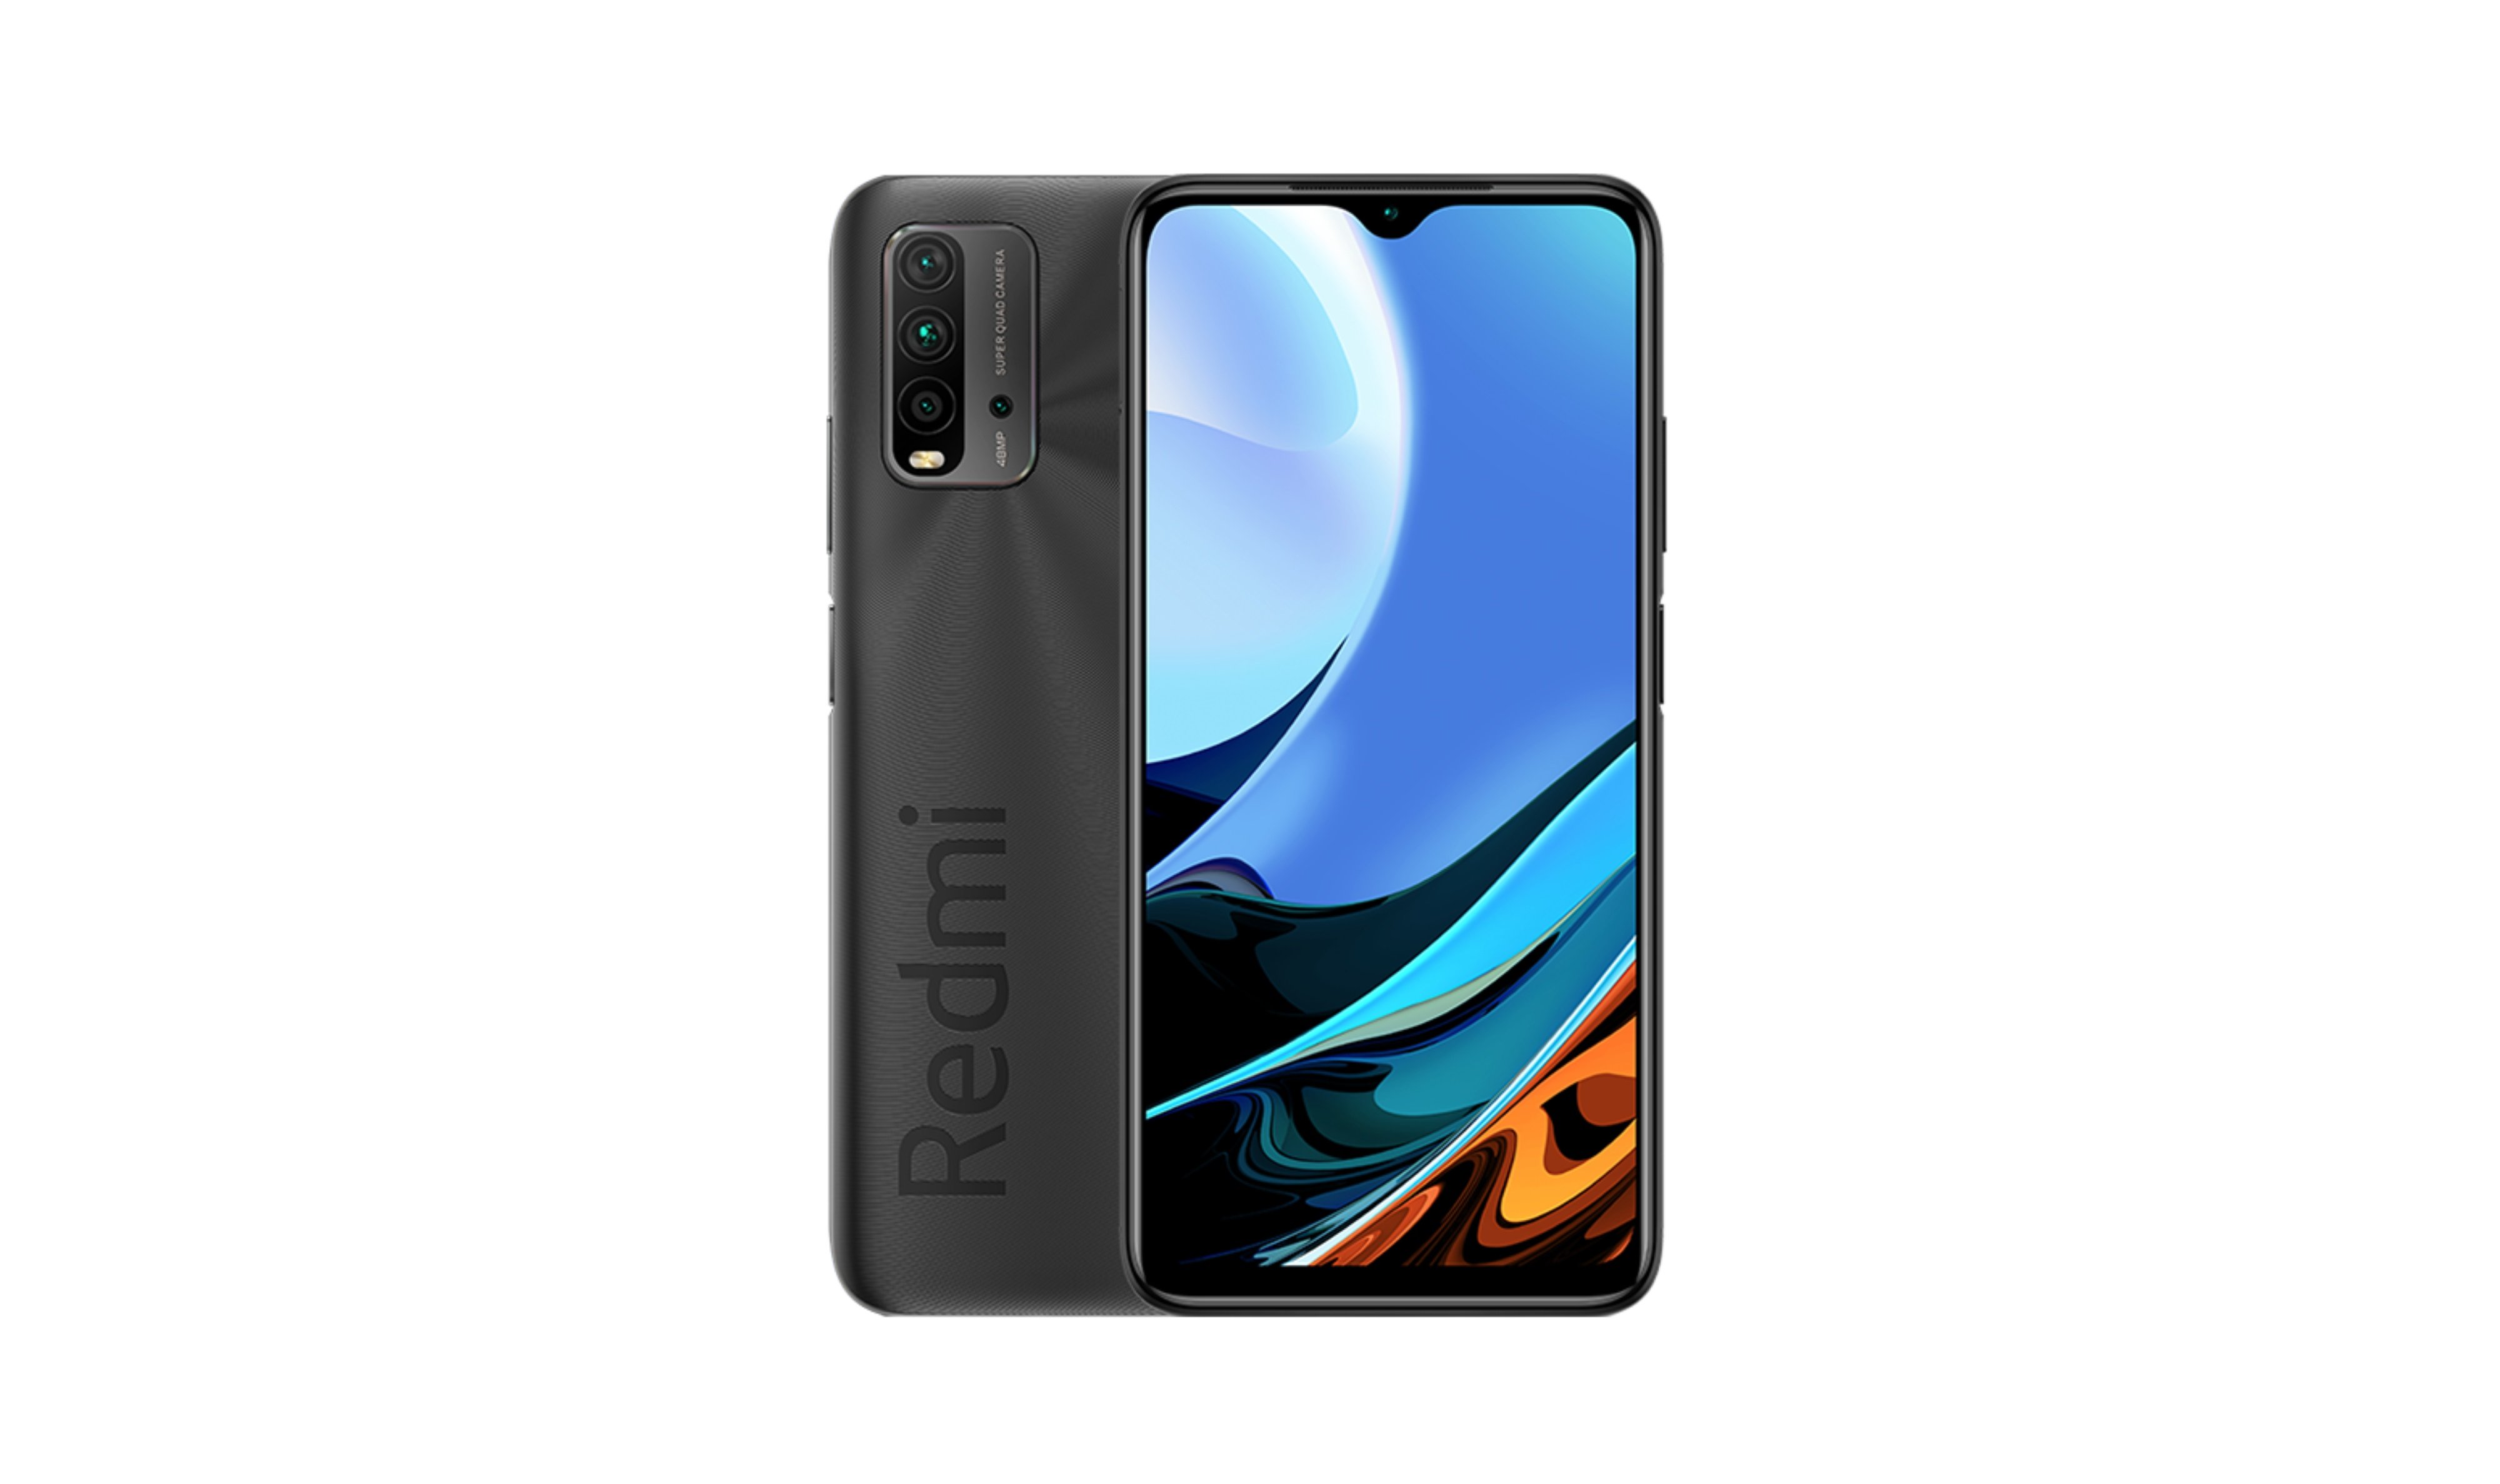 Redmi 9 Power launched in India with 6,000mAh battery, Snapdragon 662